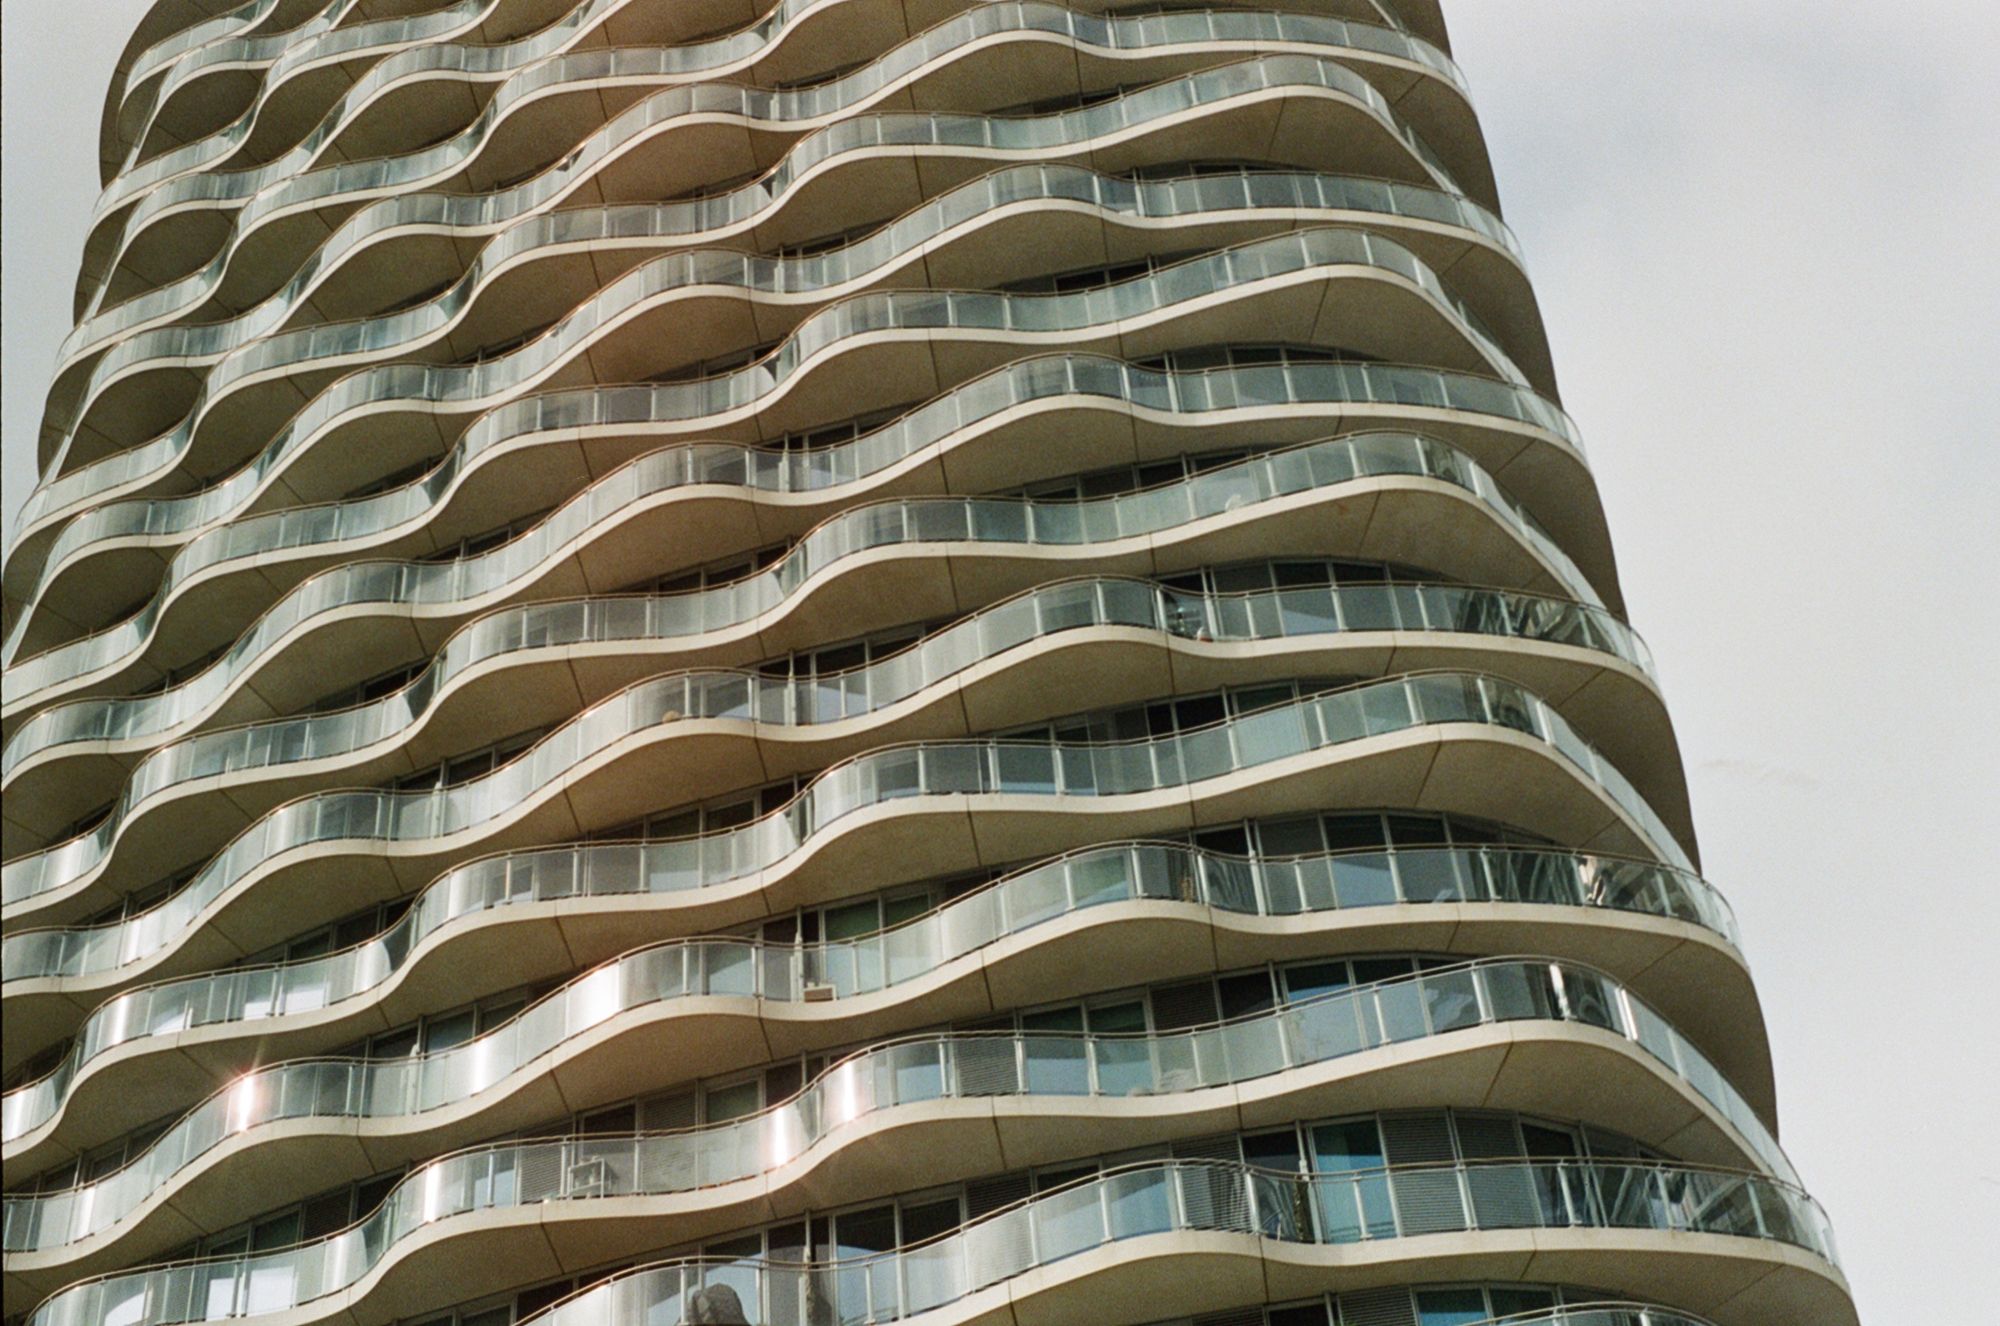 A tall apartment building with wavy glass balconies that form crenellations, each being different on different floors.